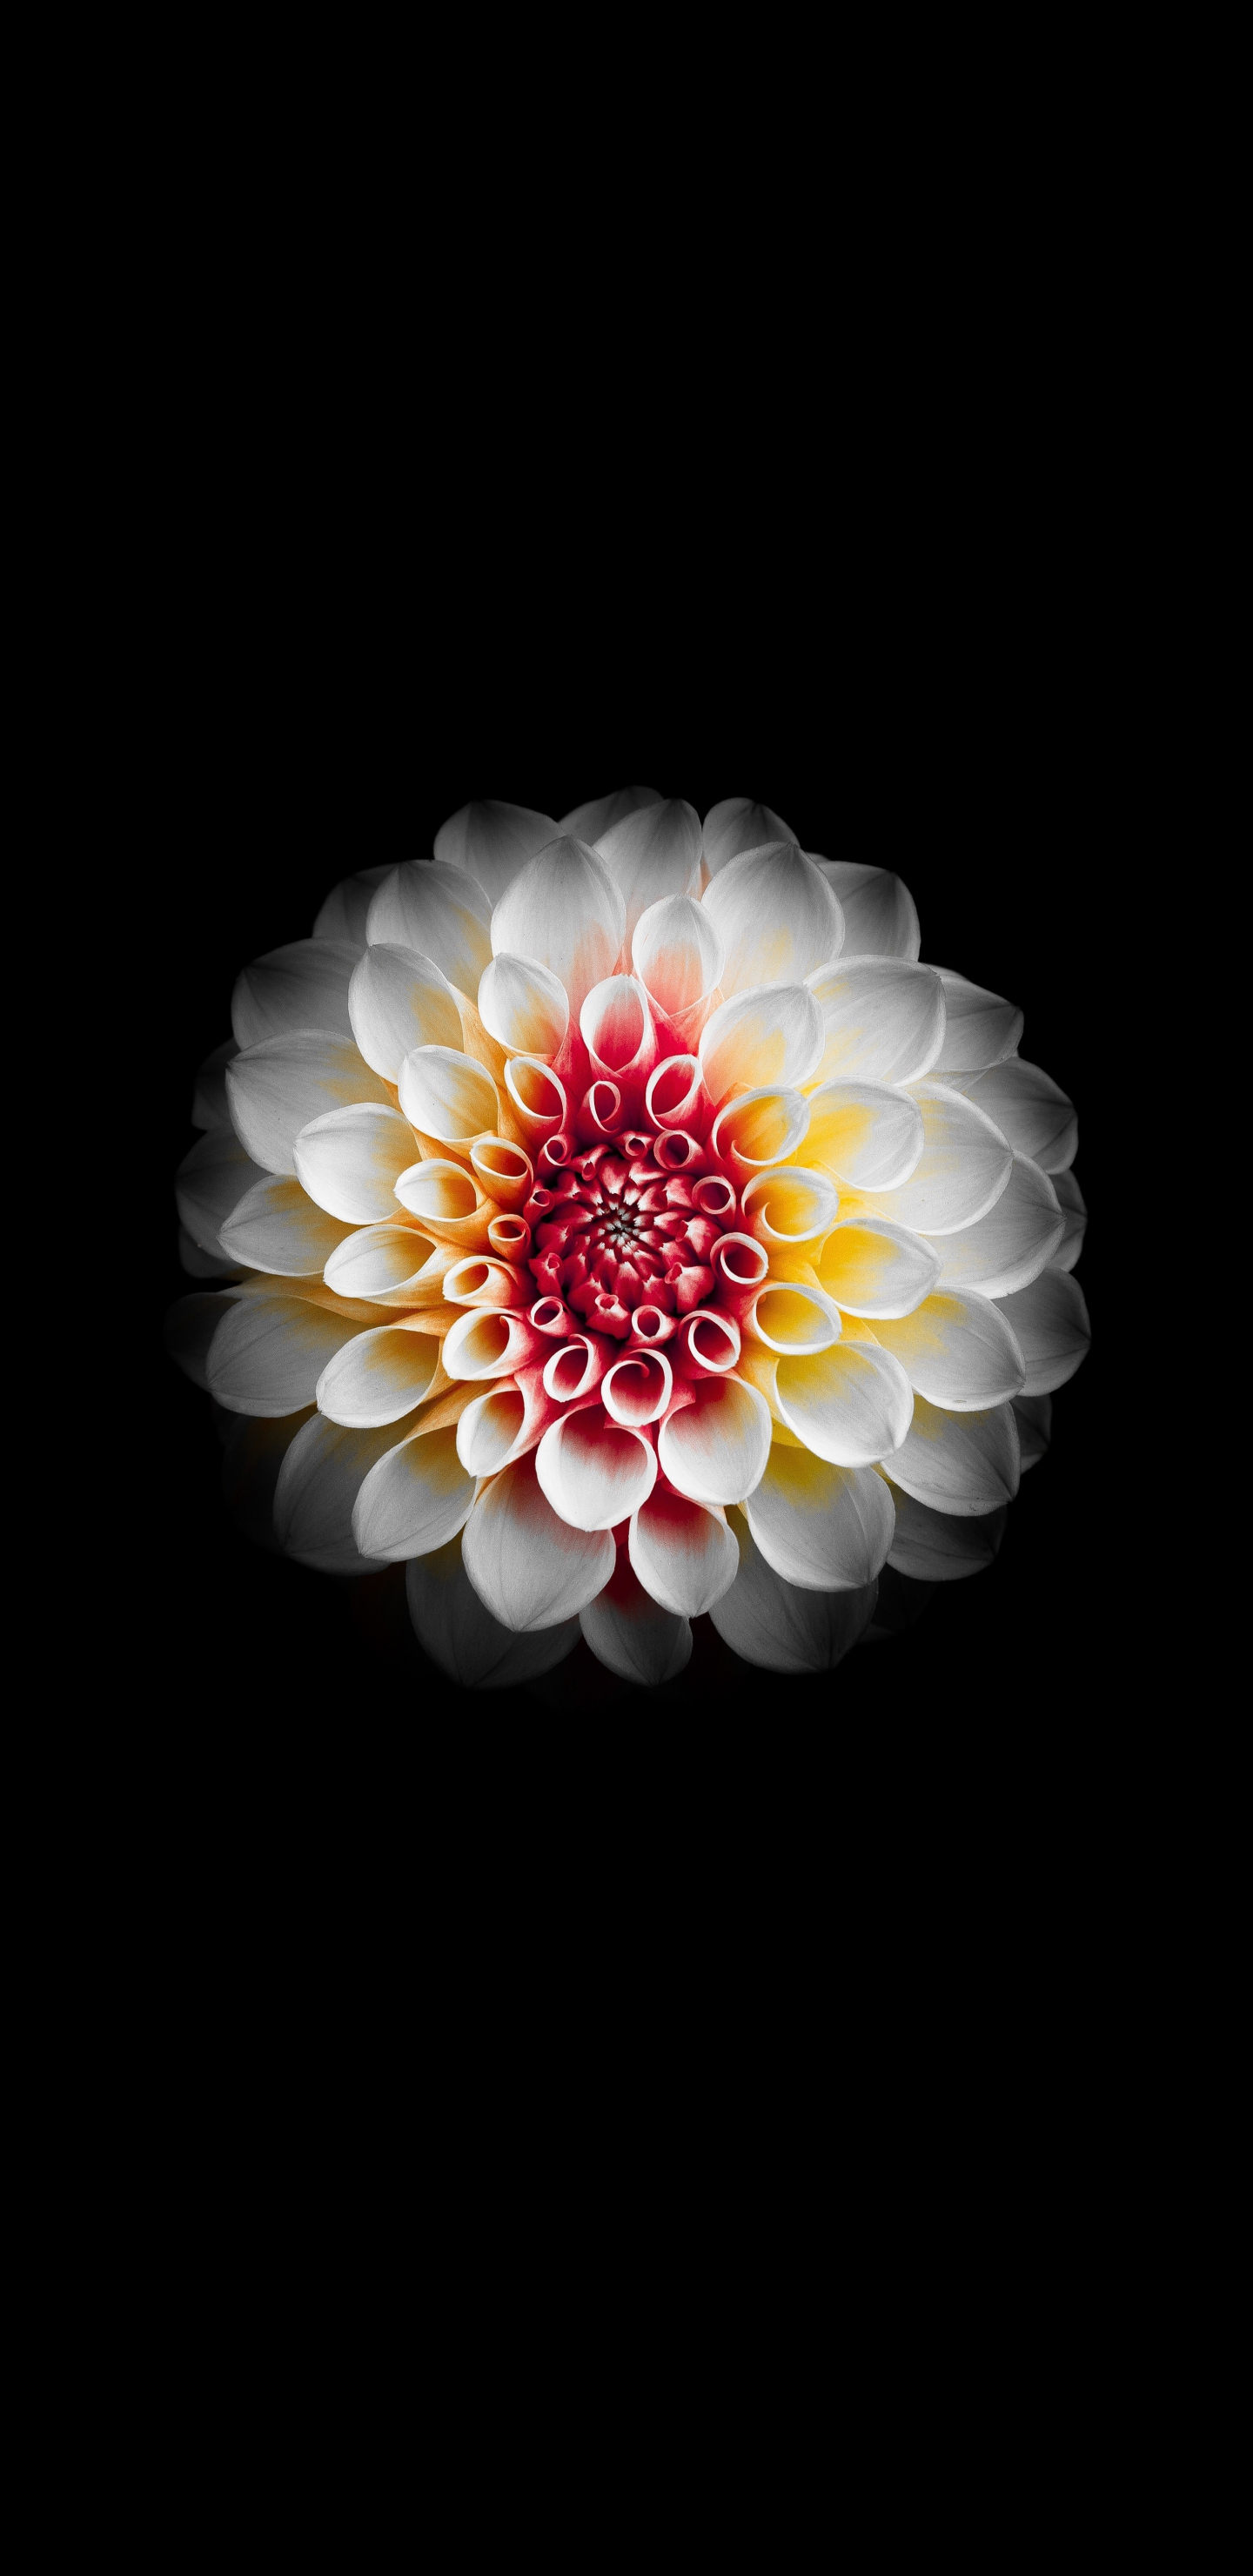 Download Galaxy Z Flip wallpapers and see your home screen bloom   SamMobile